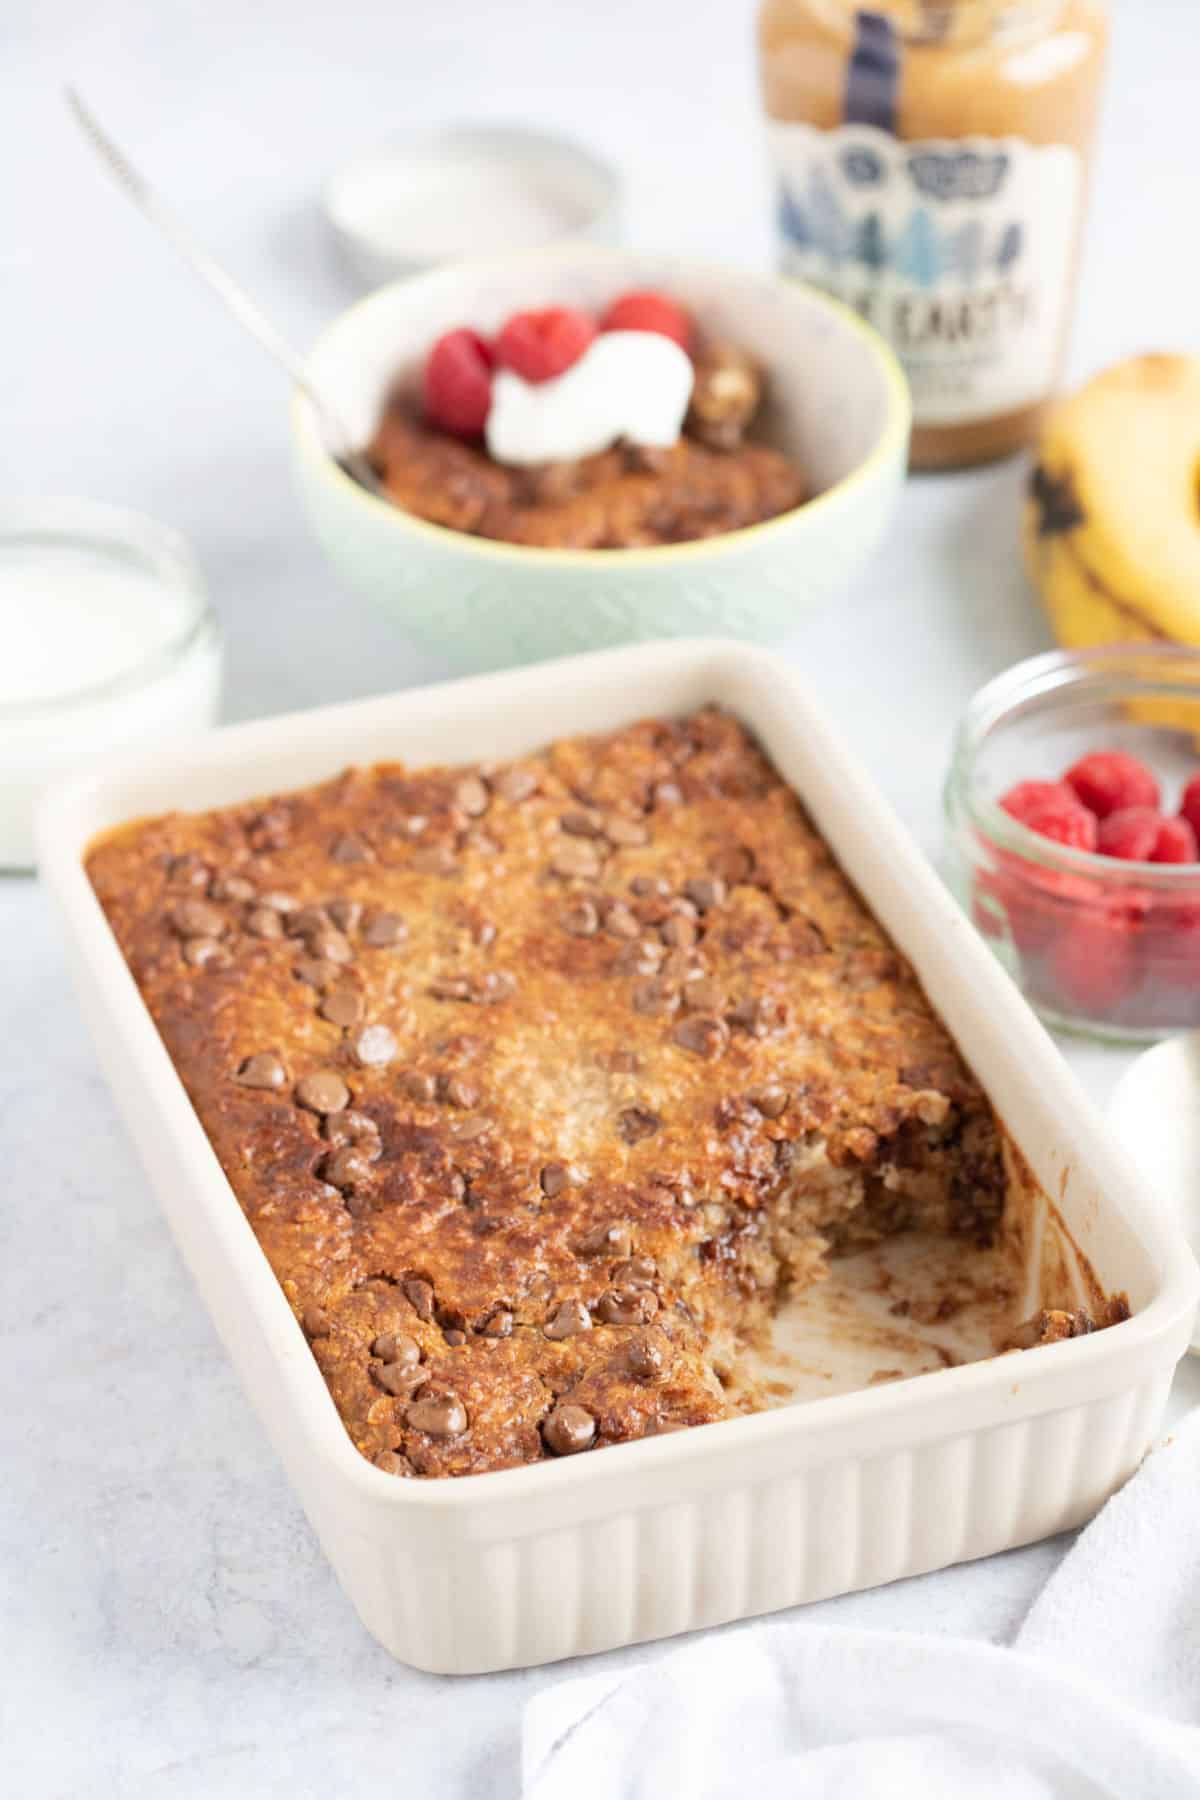 Banana, peanut butter and chocolate chip air fryer baked oats in a rectangular dish.